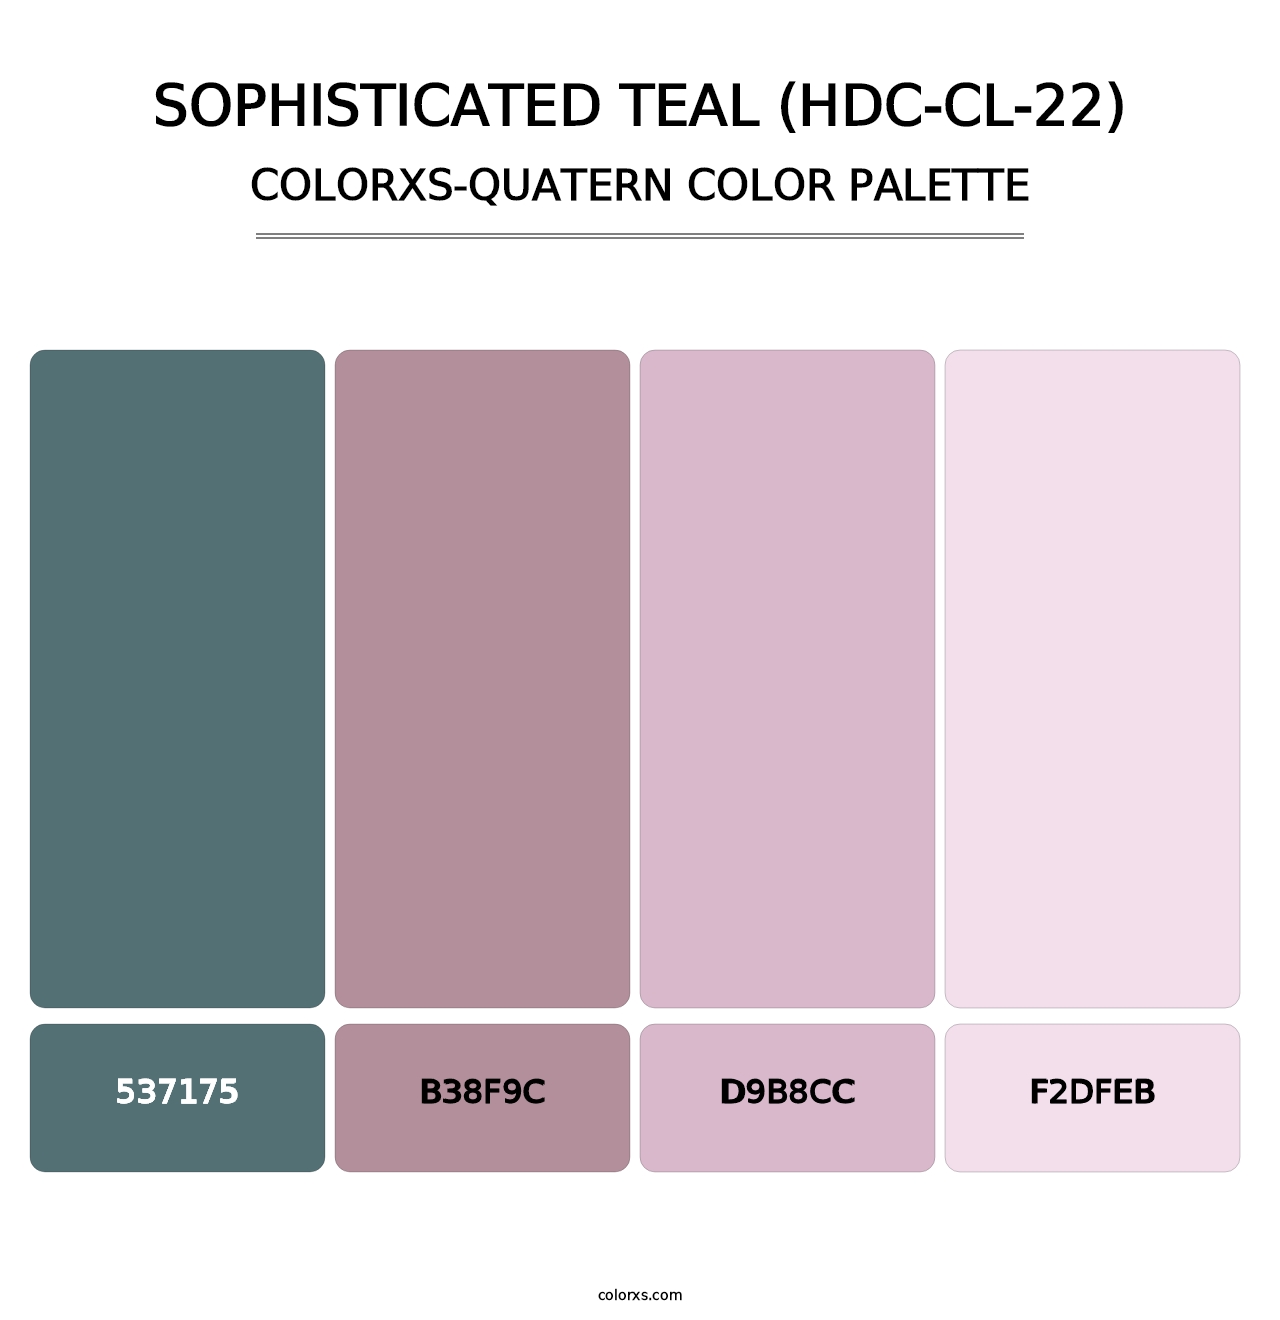 Sophisticated Teal (HDC-CL-22) - Colorxs Quatern Palette